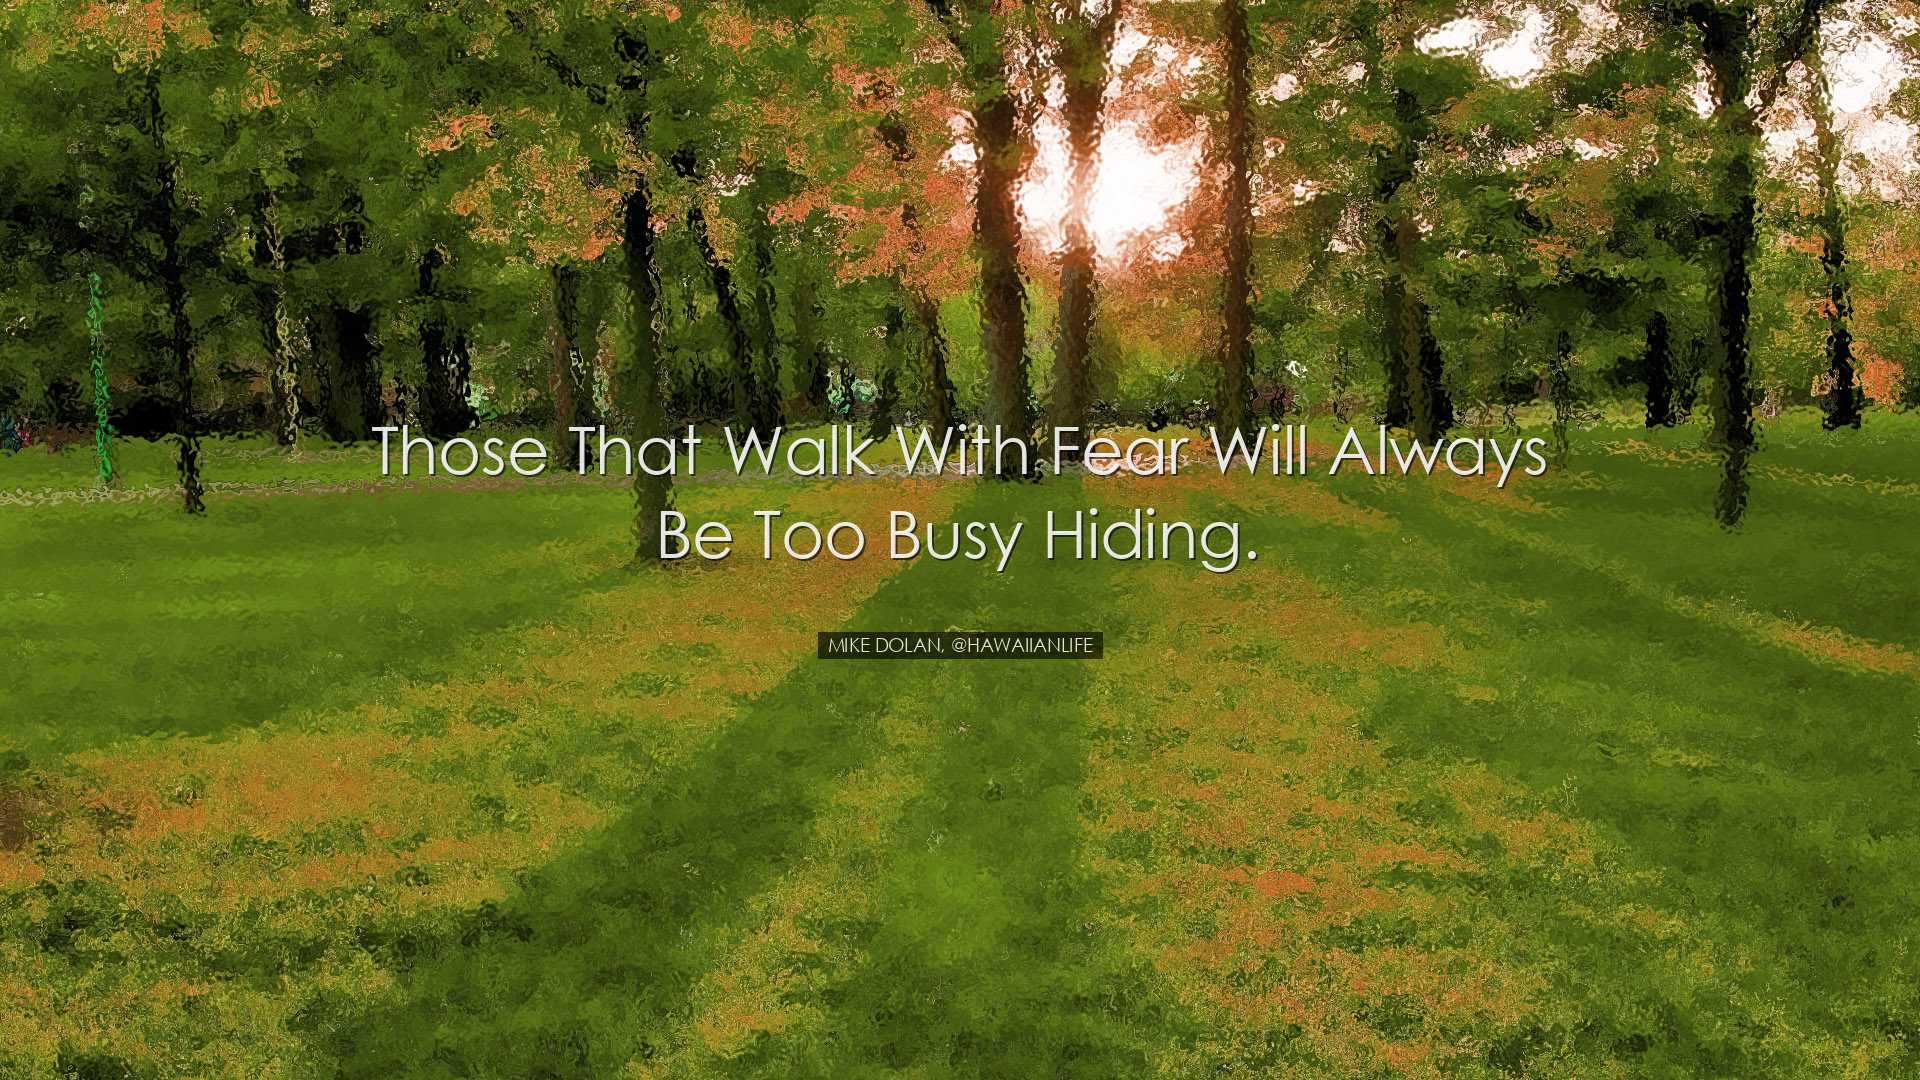 Those that walk with fear will always be too busy hiding. - Mike D